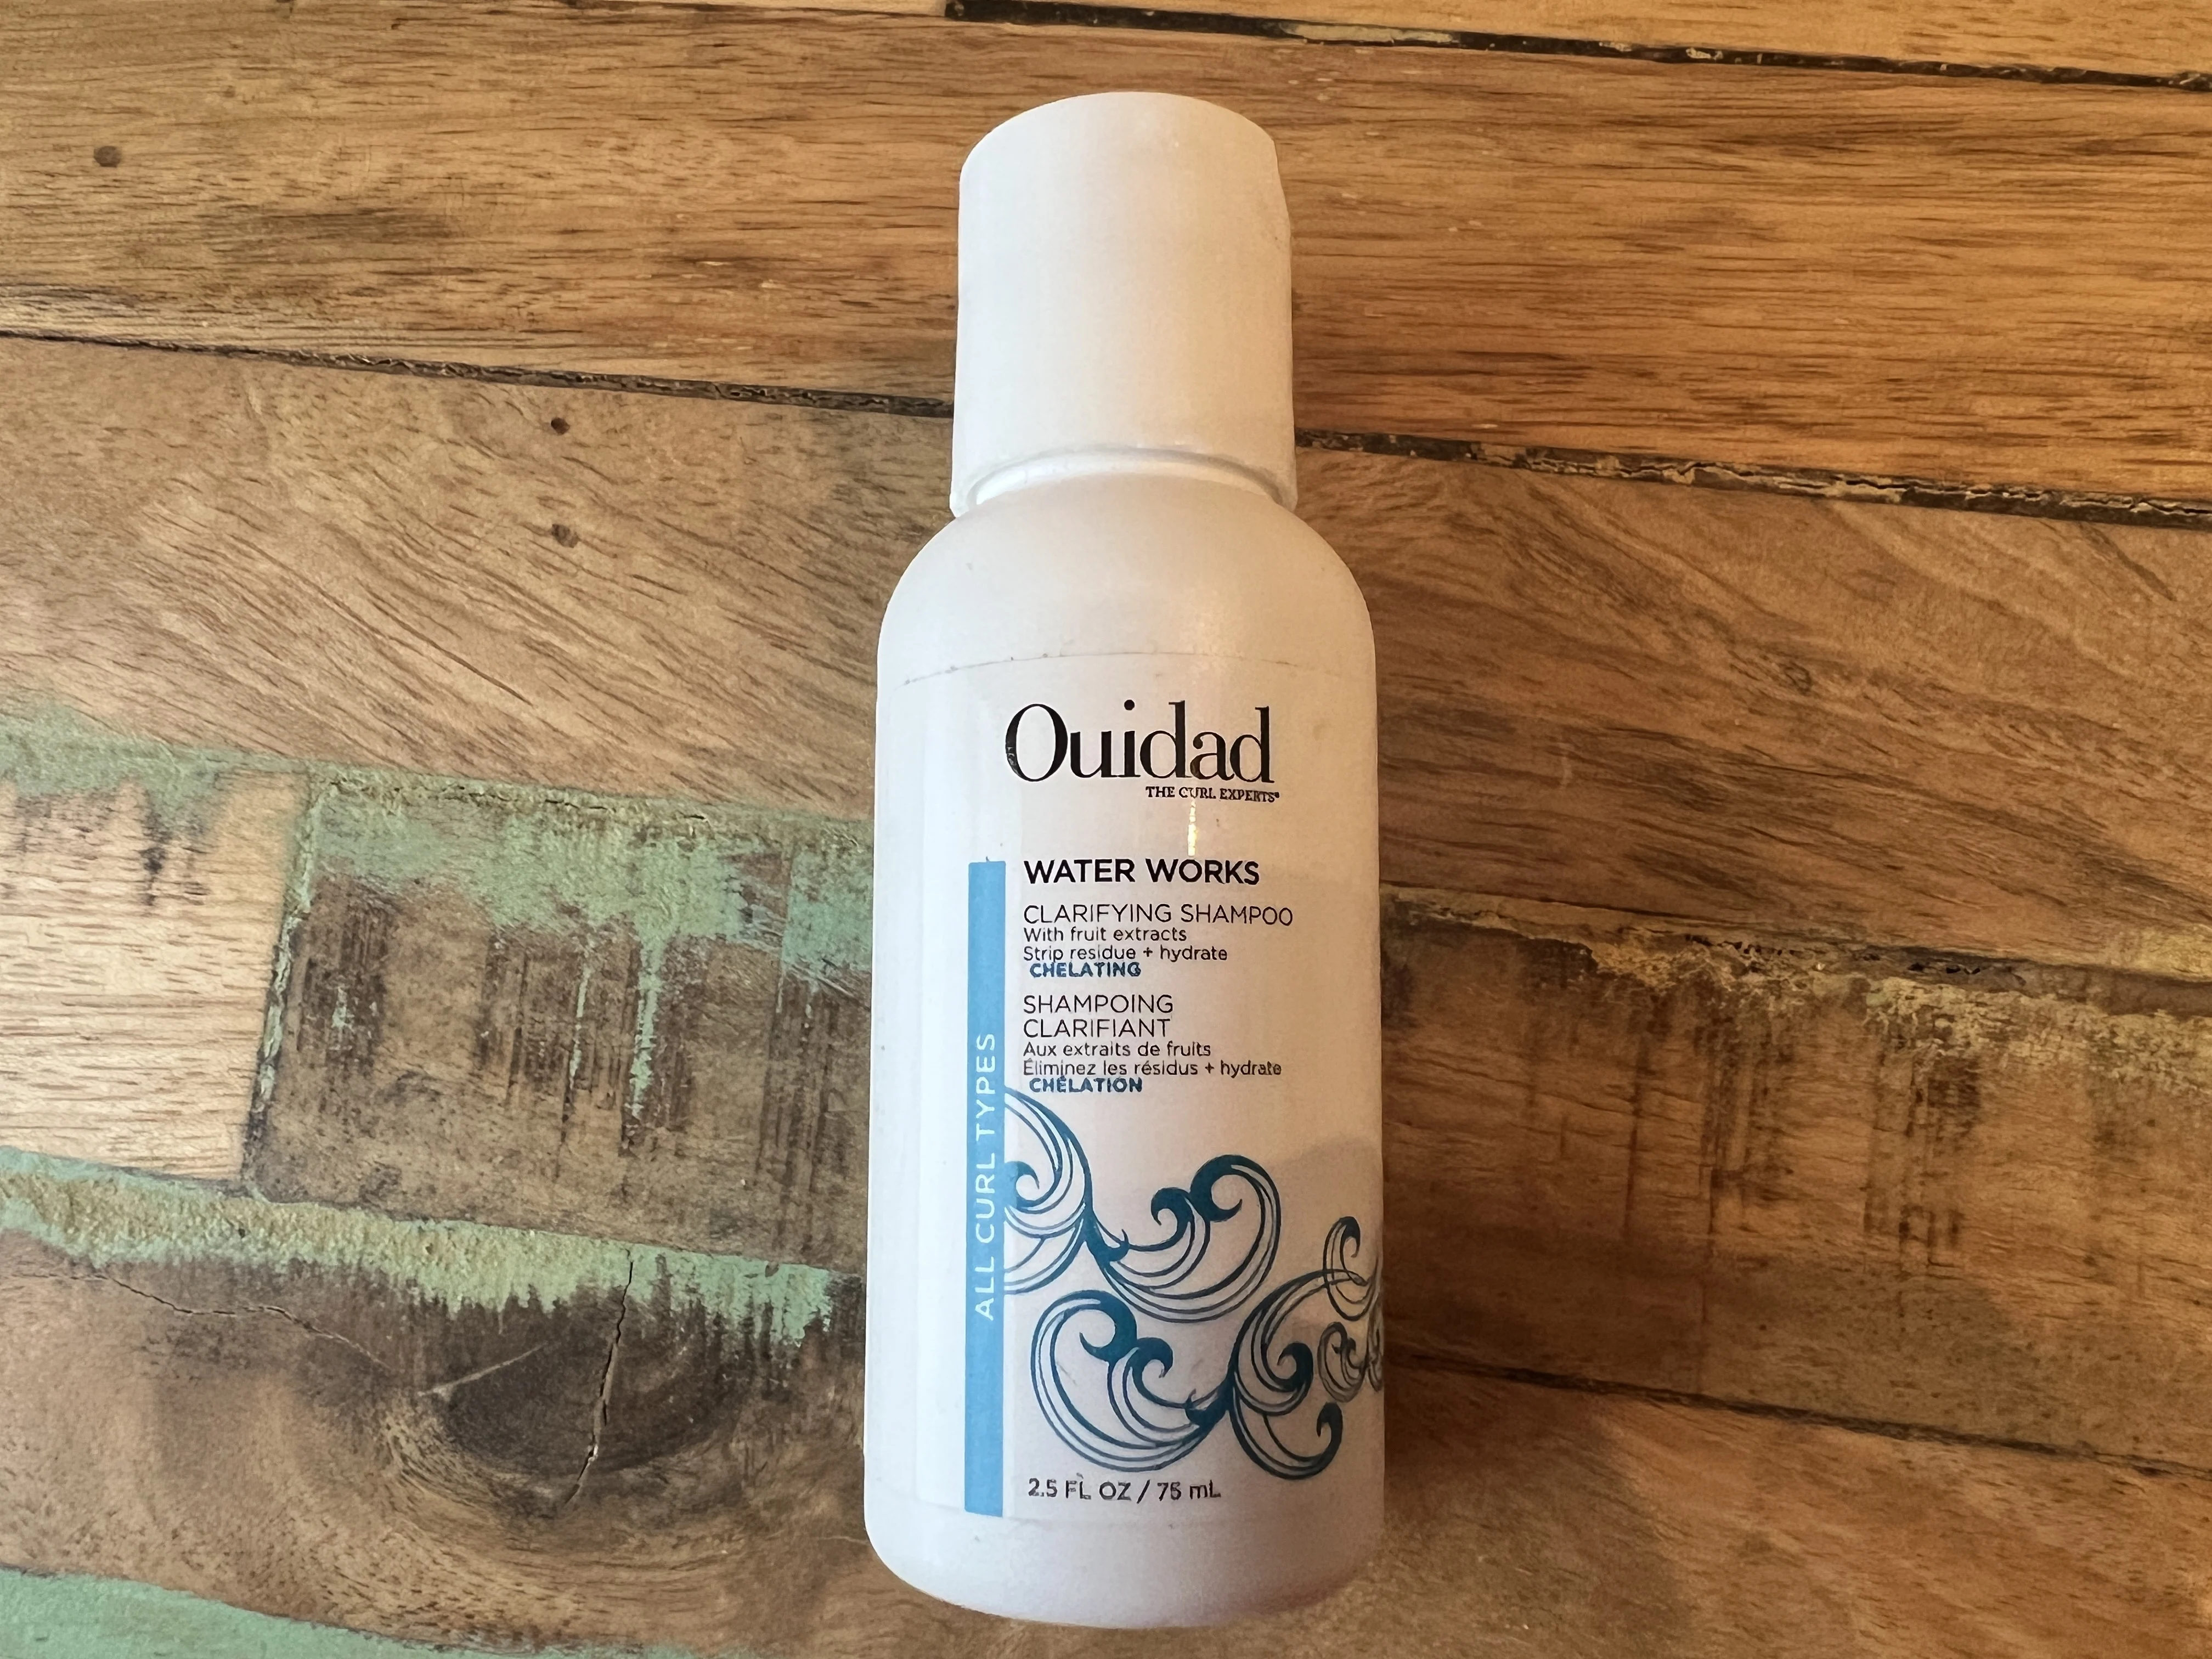 Ouidad: The Curl Experts - Water Works clarifying shampoo with fruit extracts.